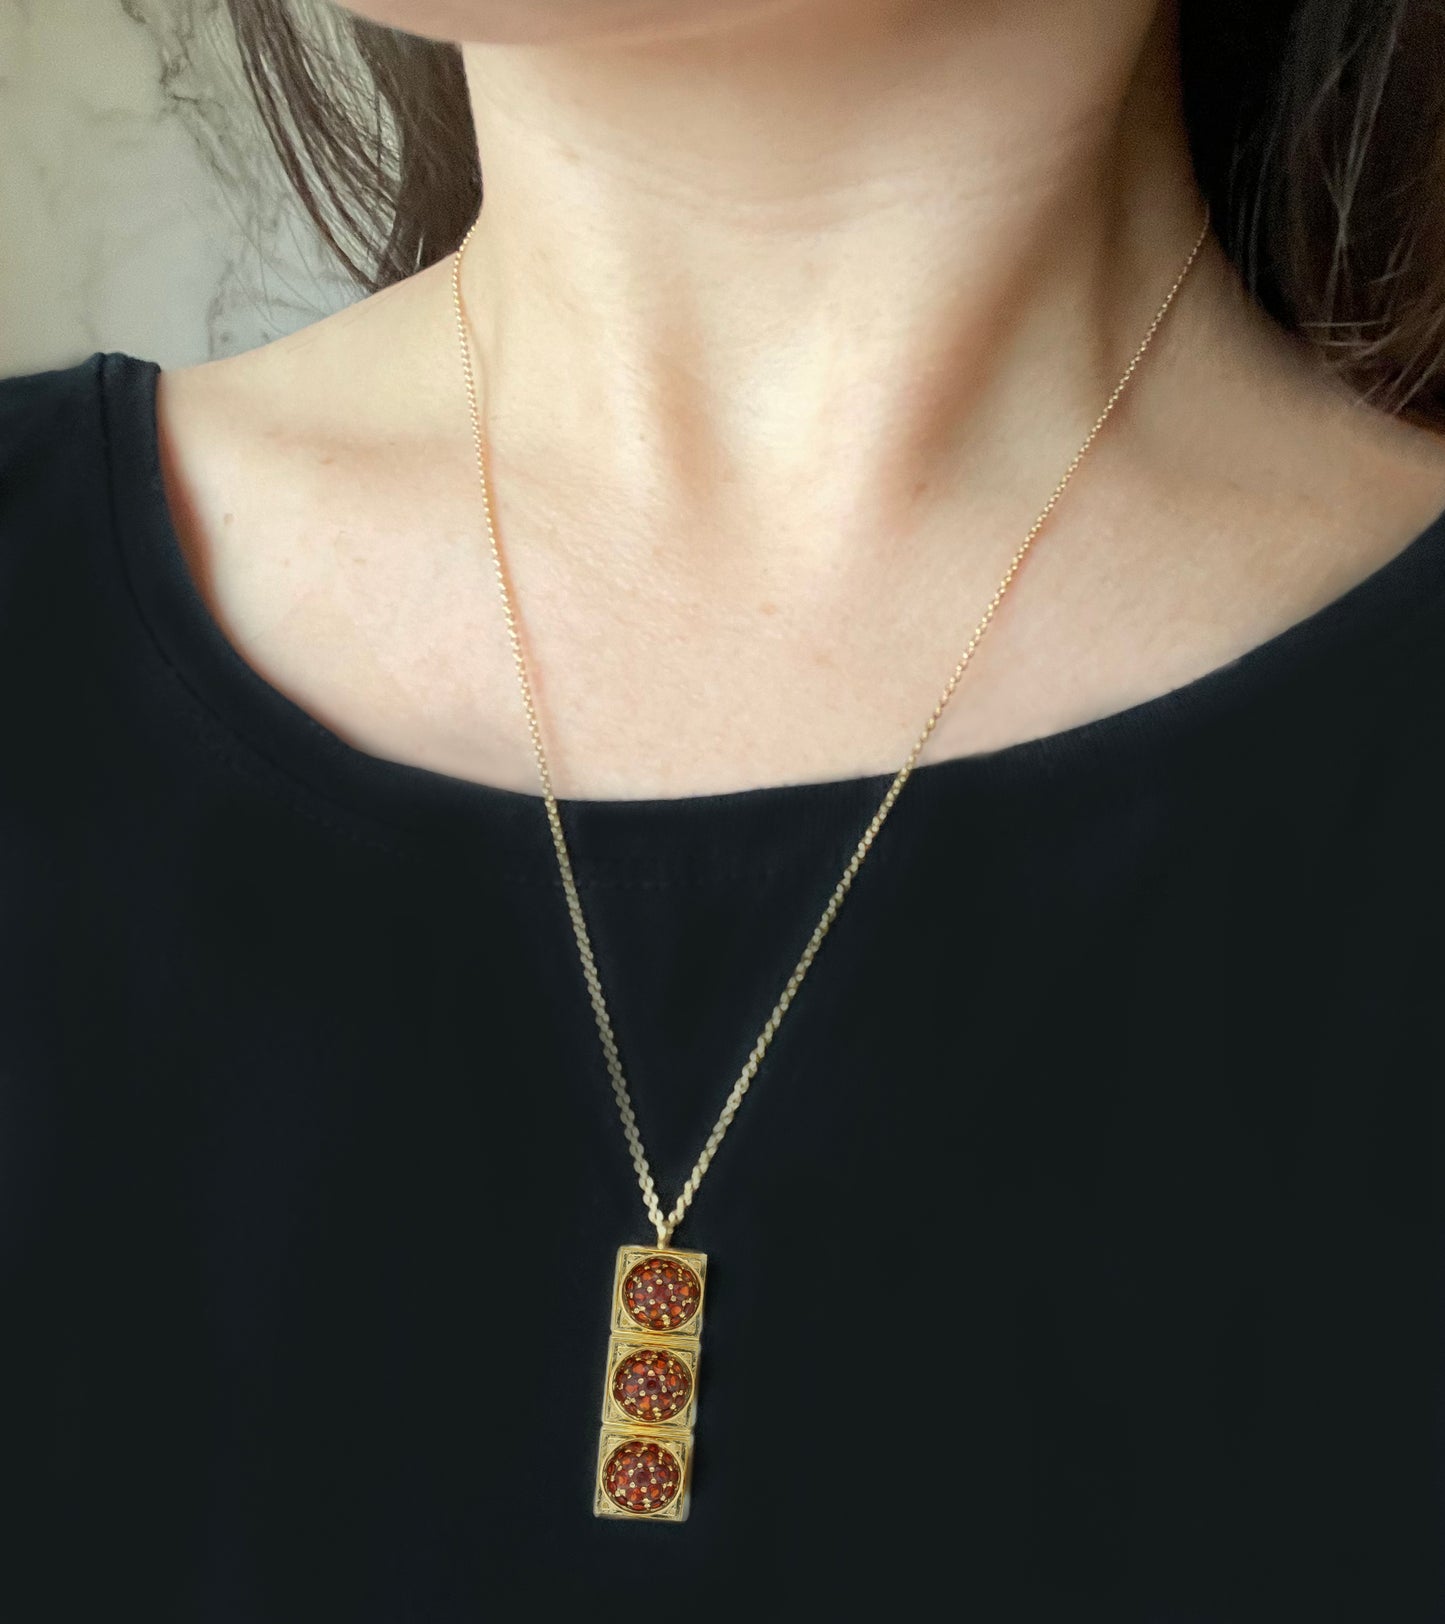 Robot necklace with electronic resistor elements.